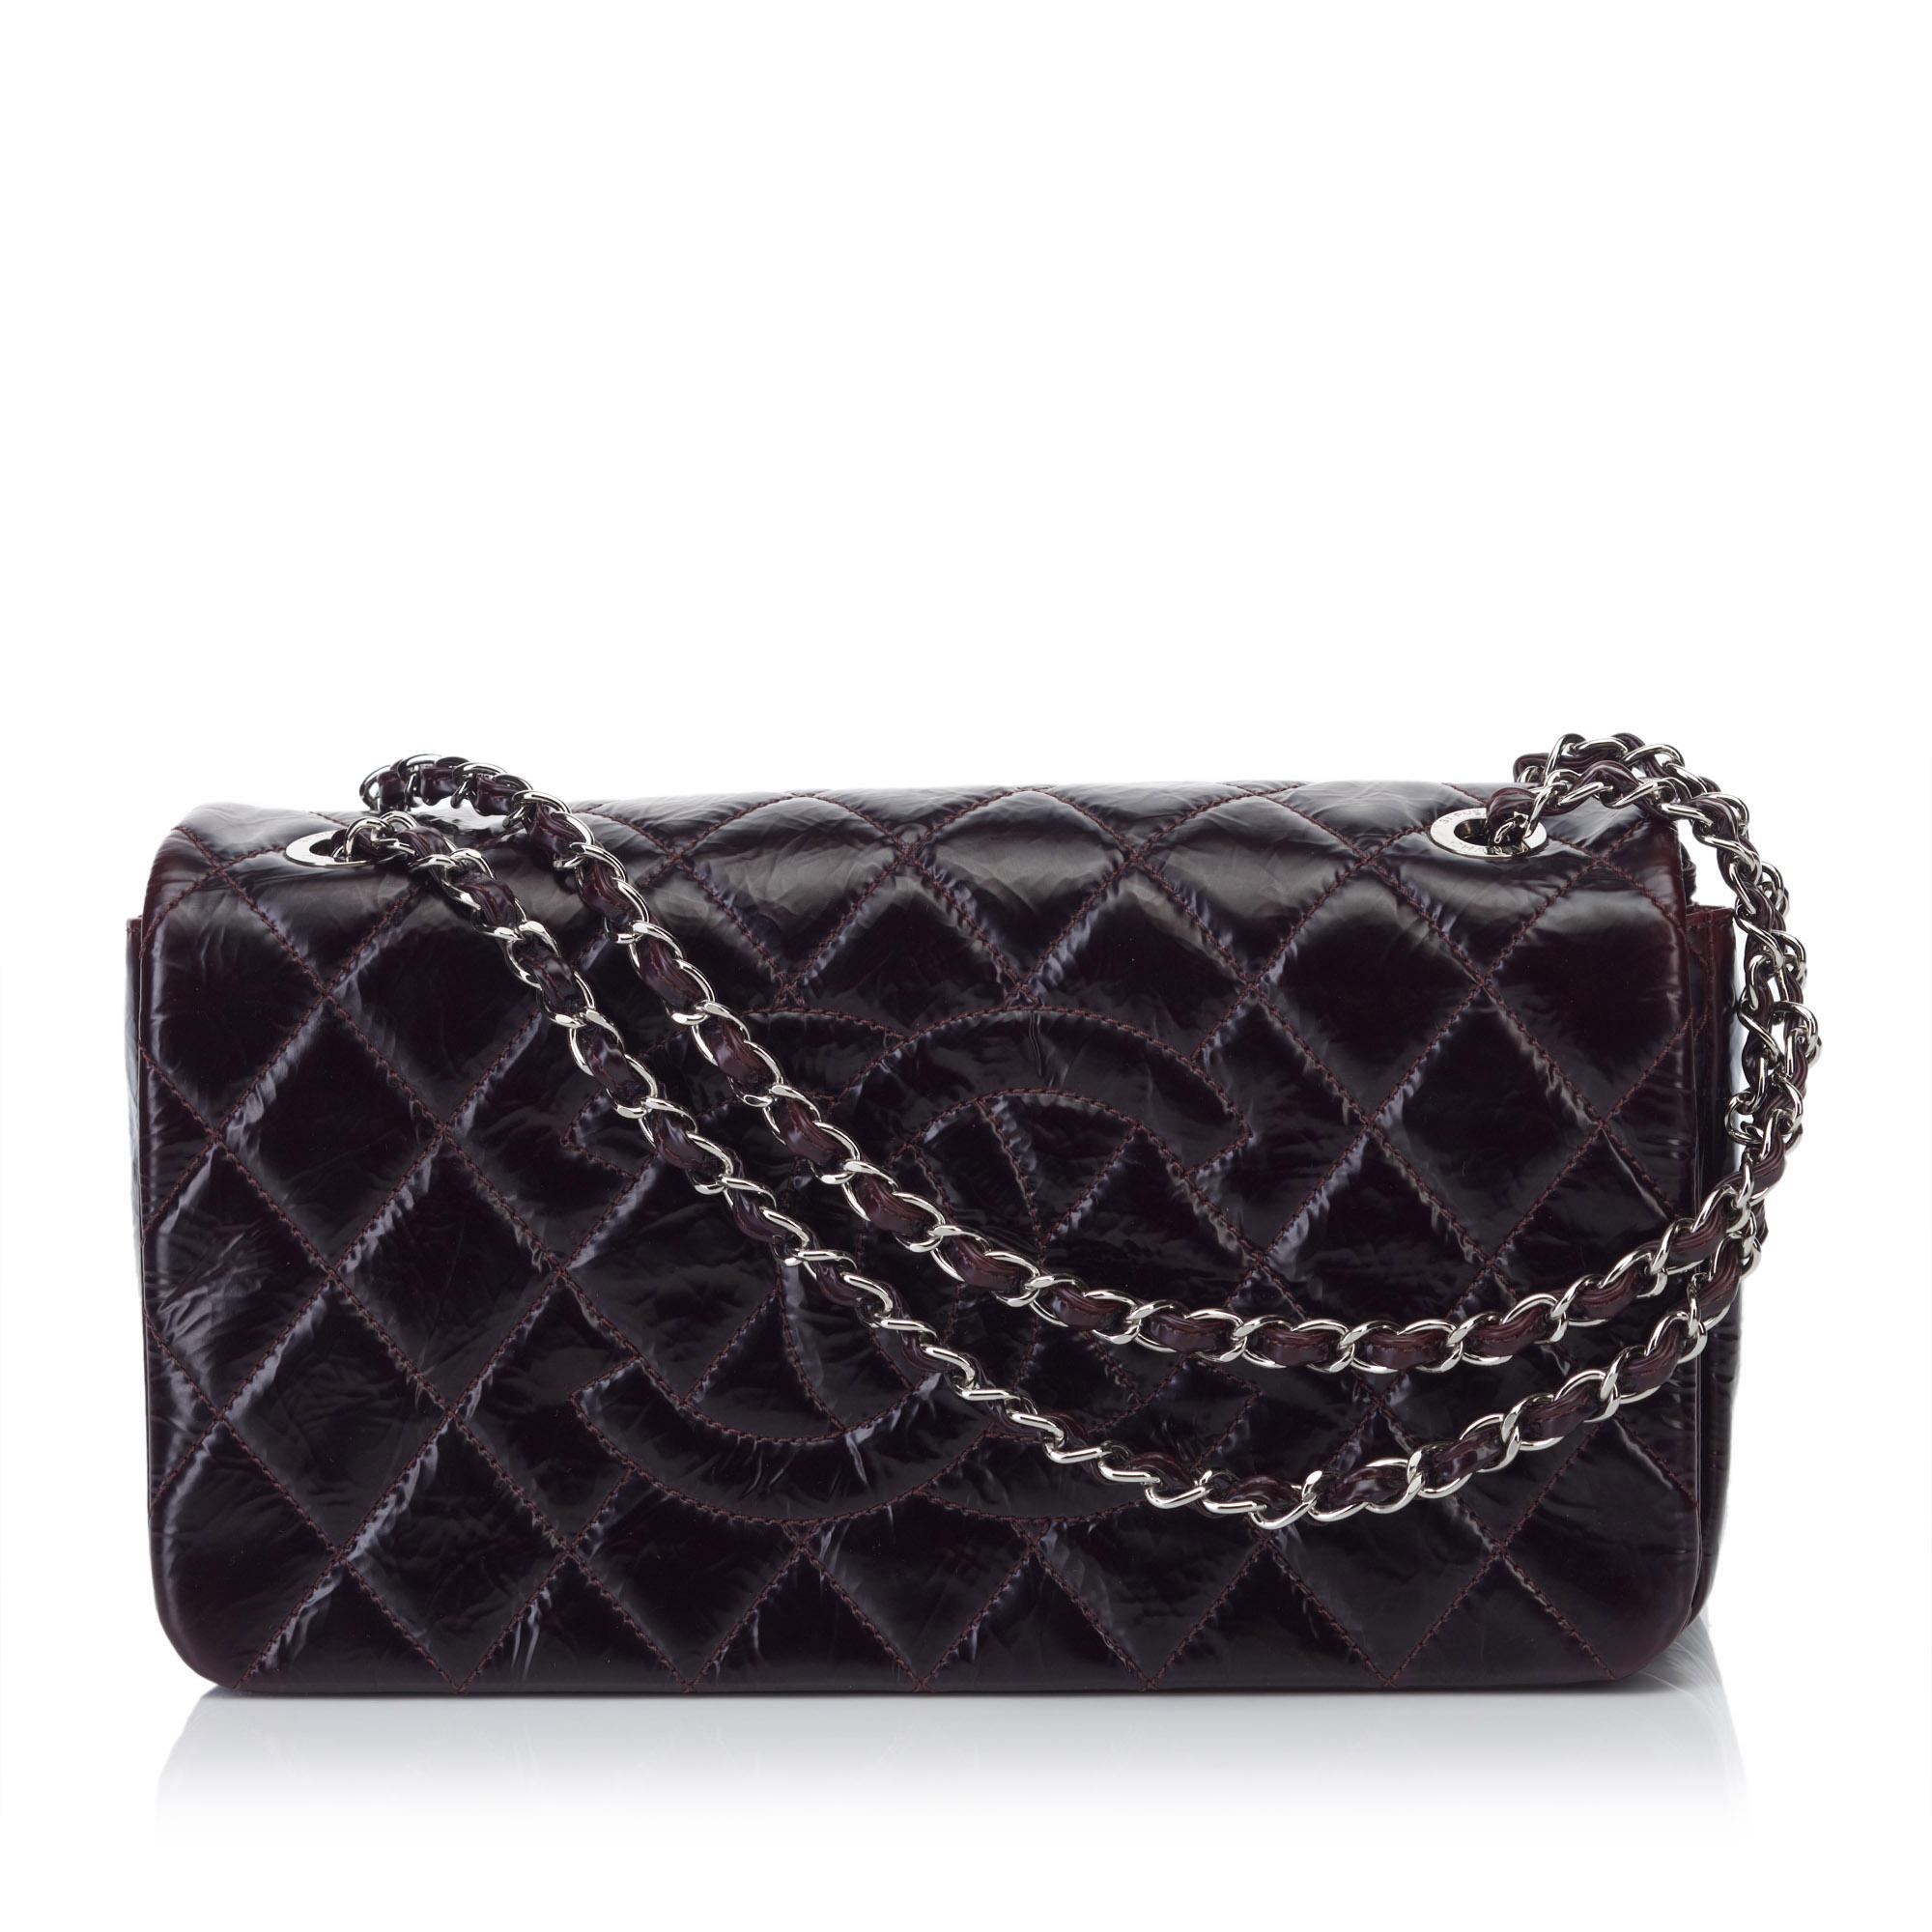 Chanel Matelasse Patent Leather Shoulder Bag in Red - Lyst